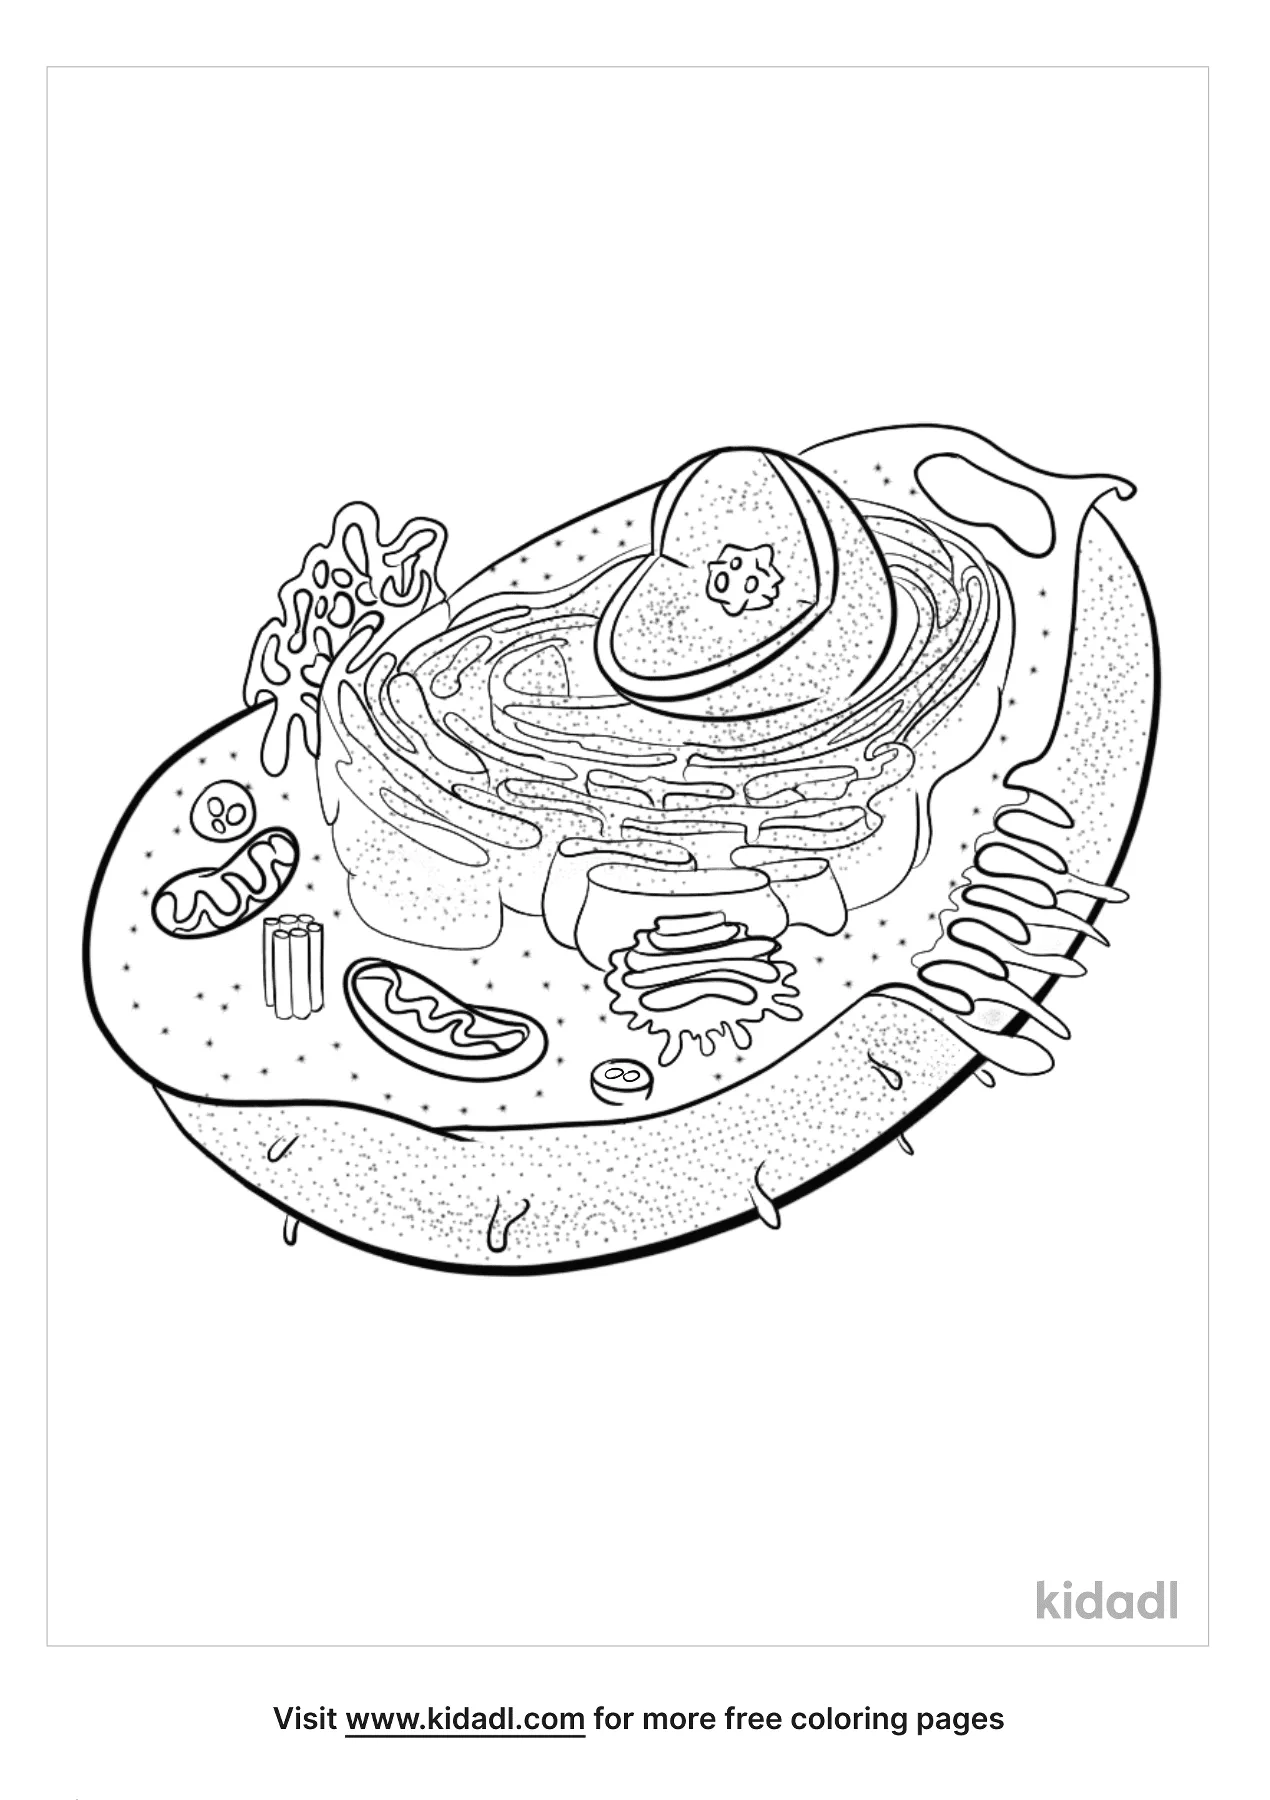 Animal Cell Coloring Pages  Free Science Coloring Pages  Kidadl In Animal Cell Coloring Worksheet